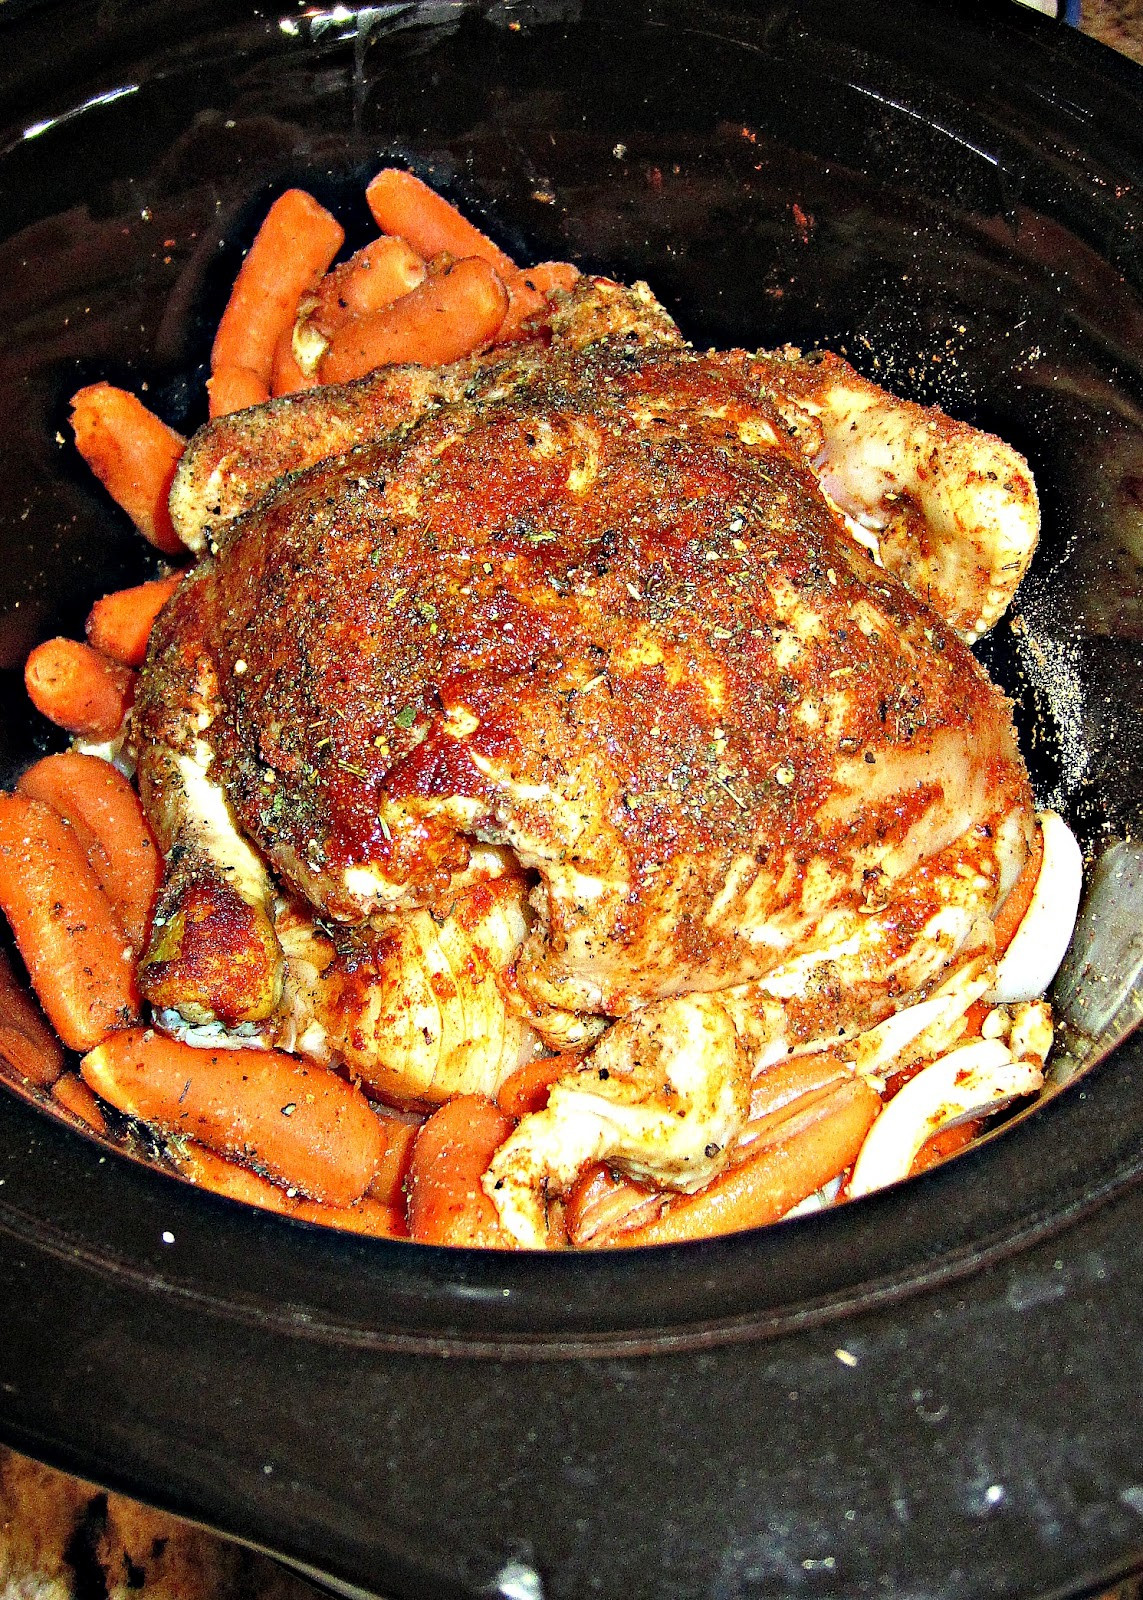 Cooking A Whole Chicken In A Crock Pot
 Crock Pot Whole Chicken